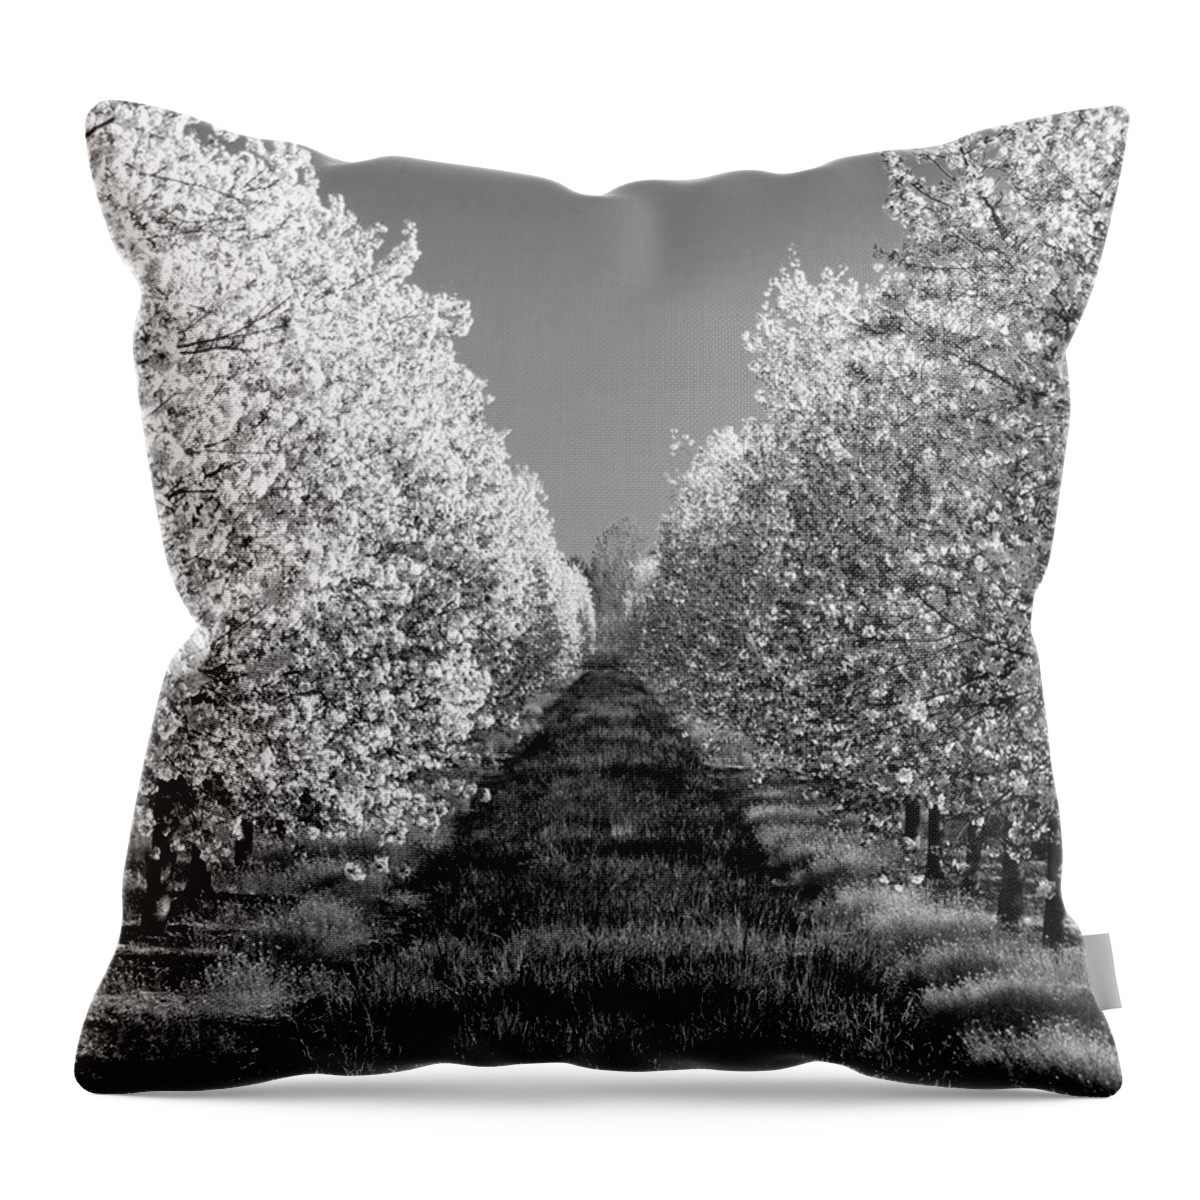 Cherry Orchard Throw Pillow featuring the photograph Cherry Blossom Perspective B W by David T Wilkinson